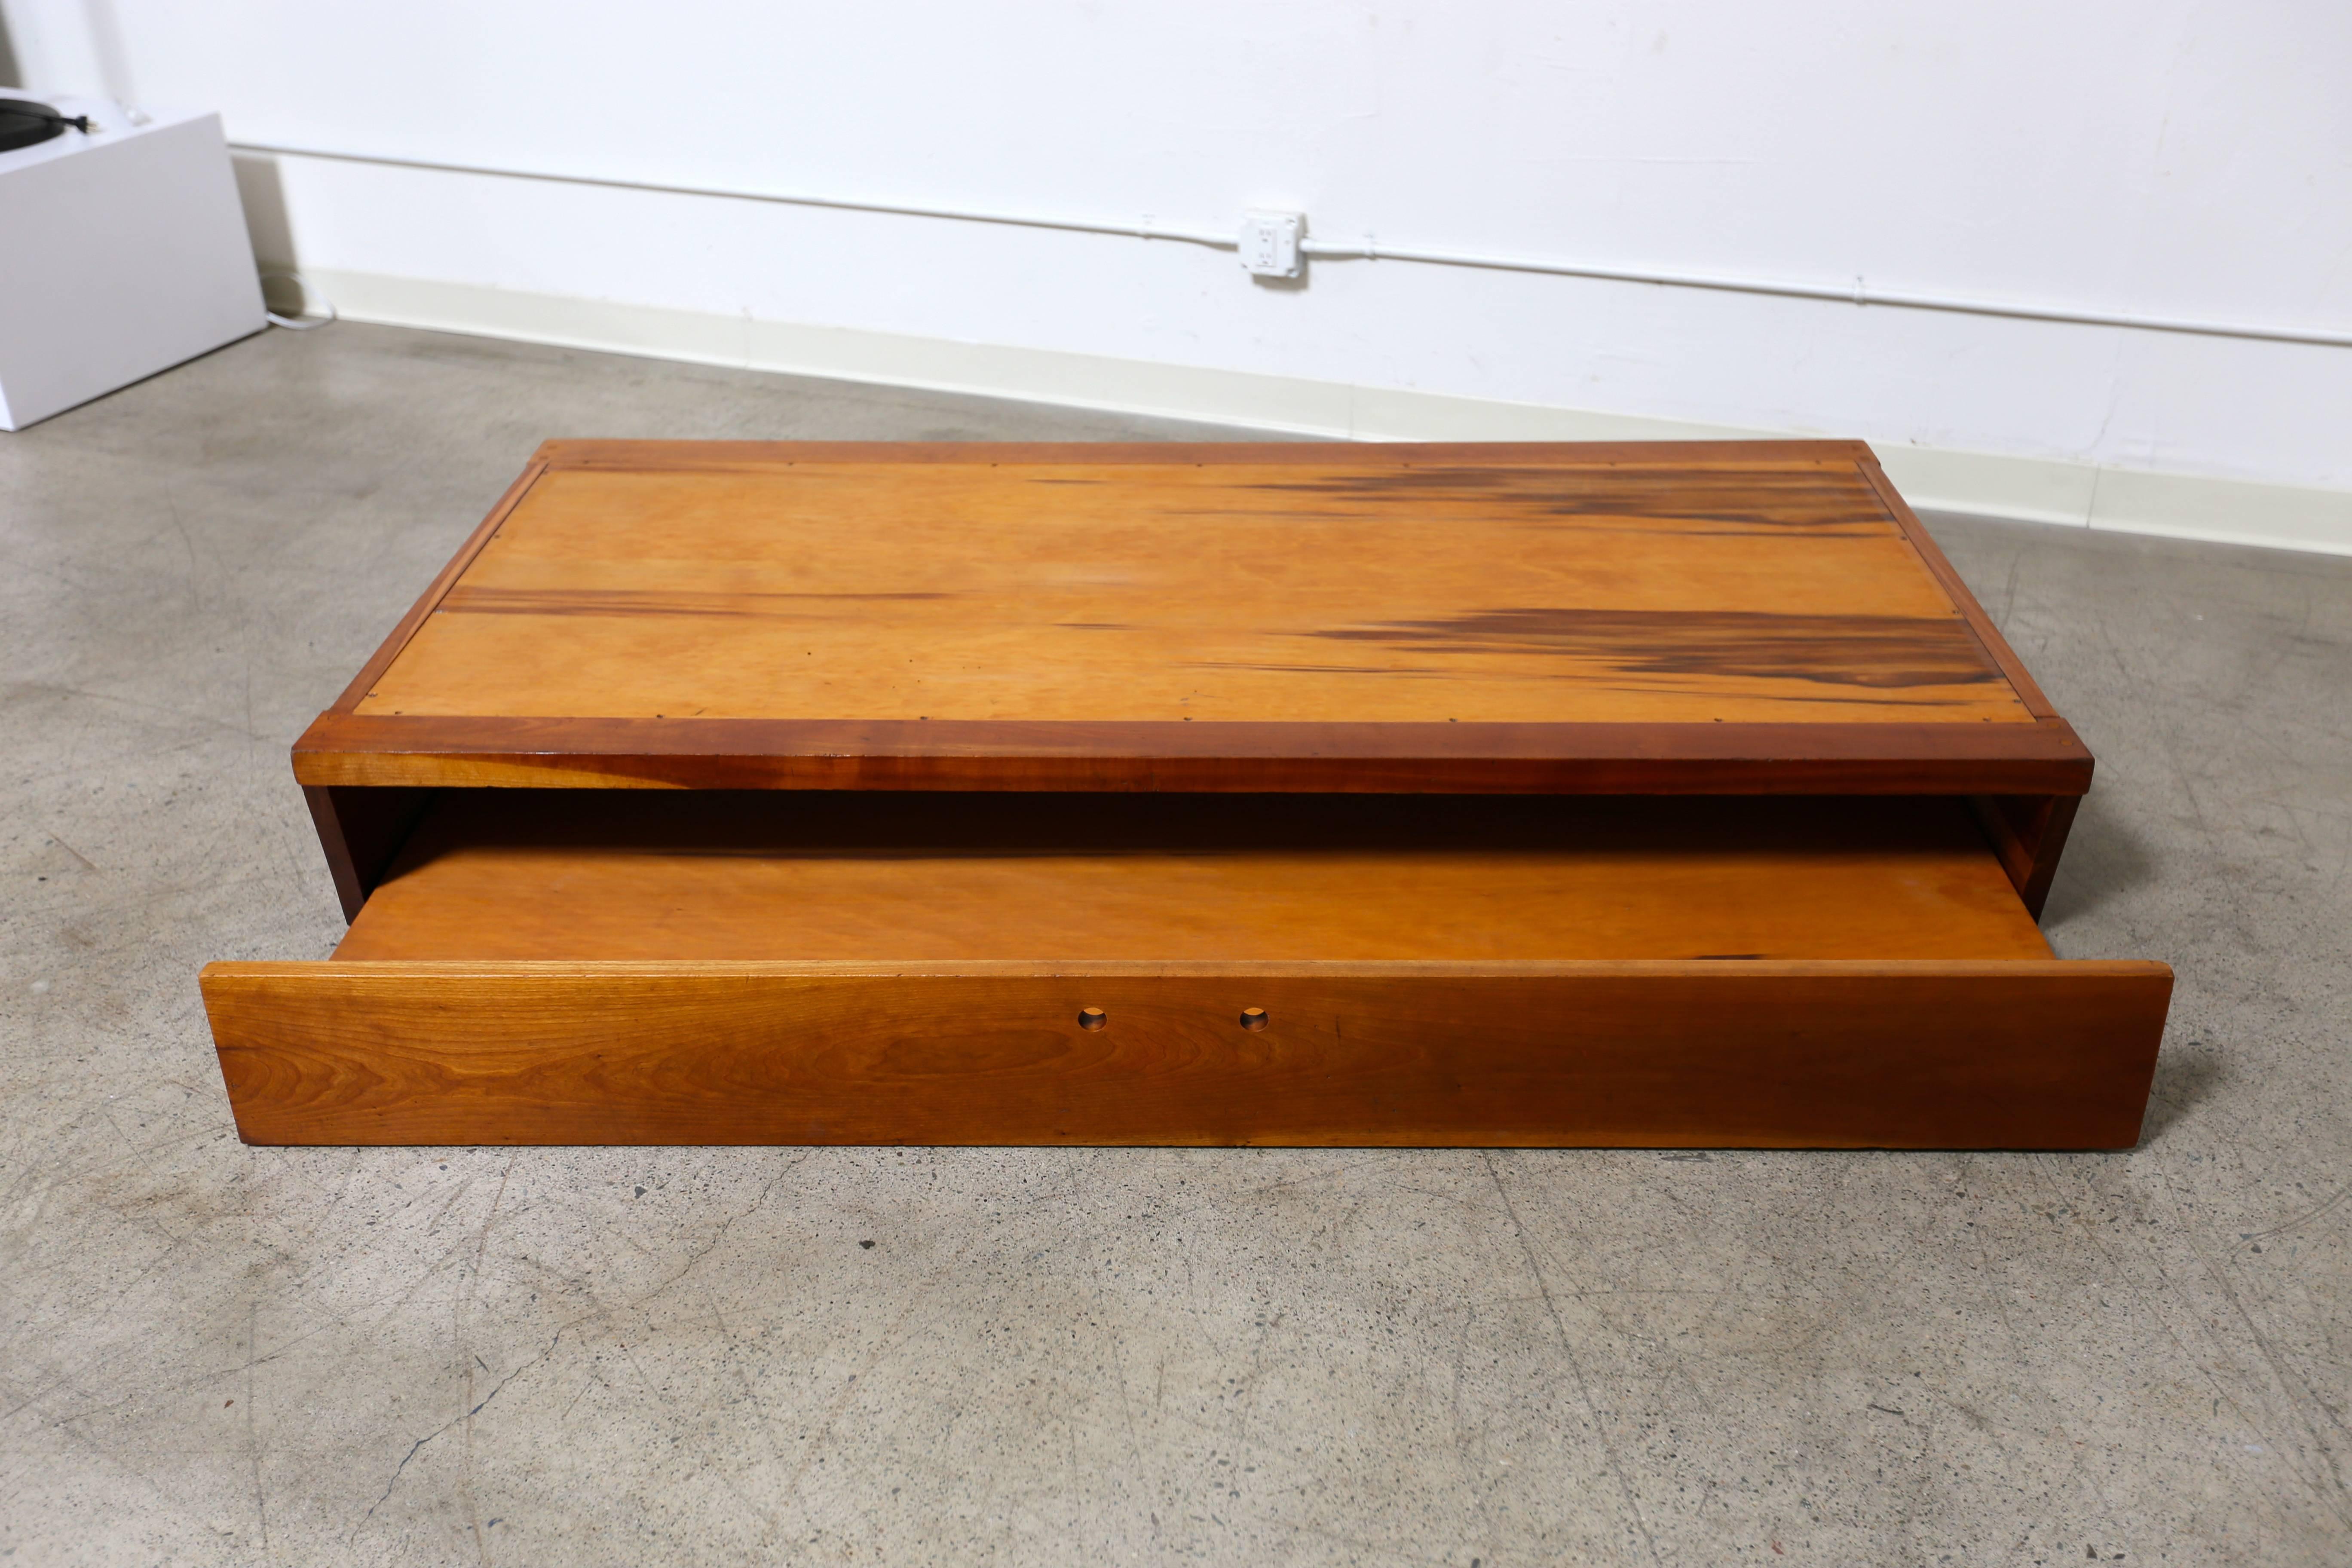 Rare trundle bed by George Nakashima, 1958. Provenance on request.